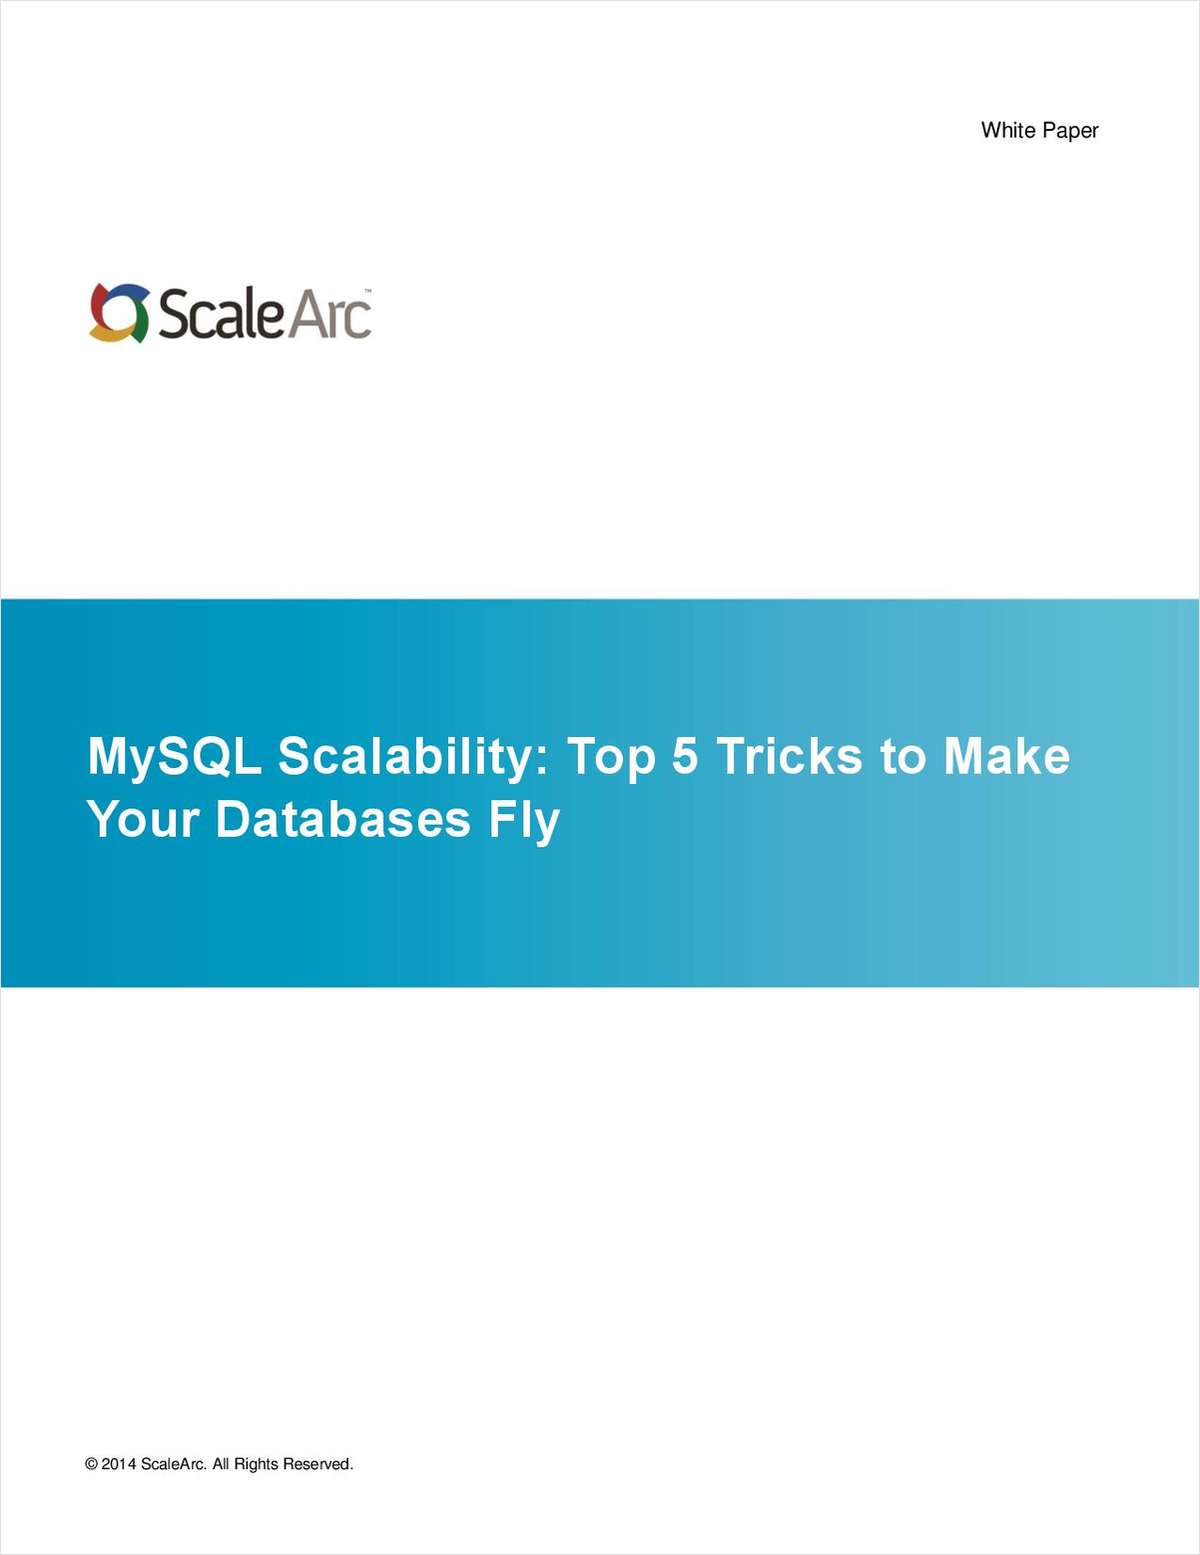 MySQL Scalability: Top 5 Tricks to Make Your Databases Fly